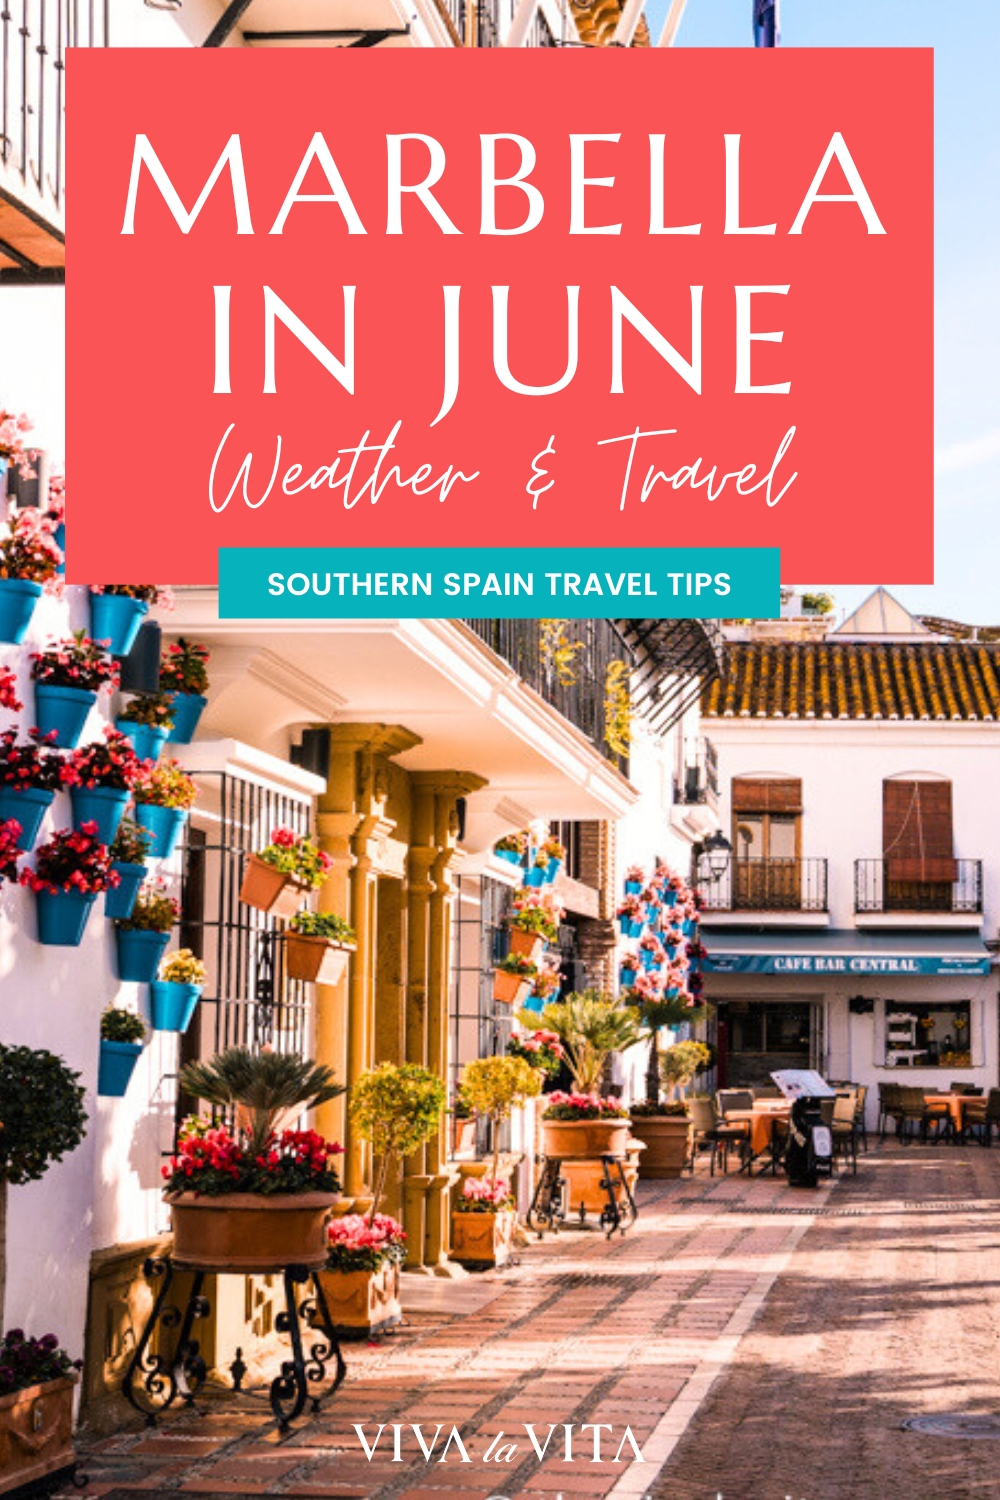 pinterest image showing the old town of marbella with a headline - marbella in june weather and travel, southern spain travel tips